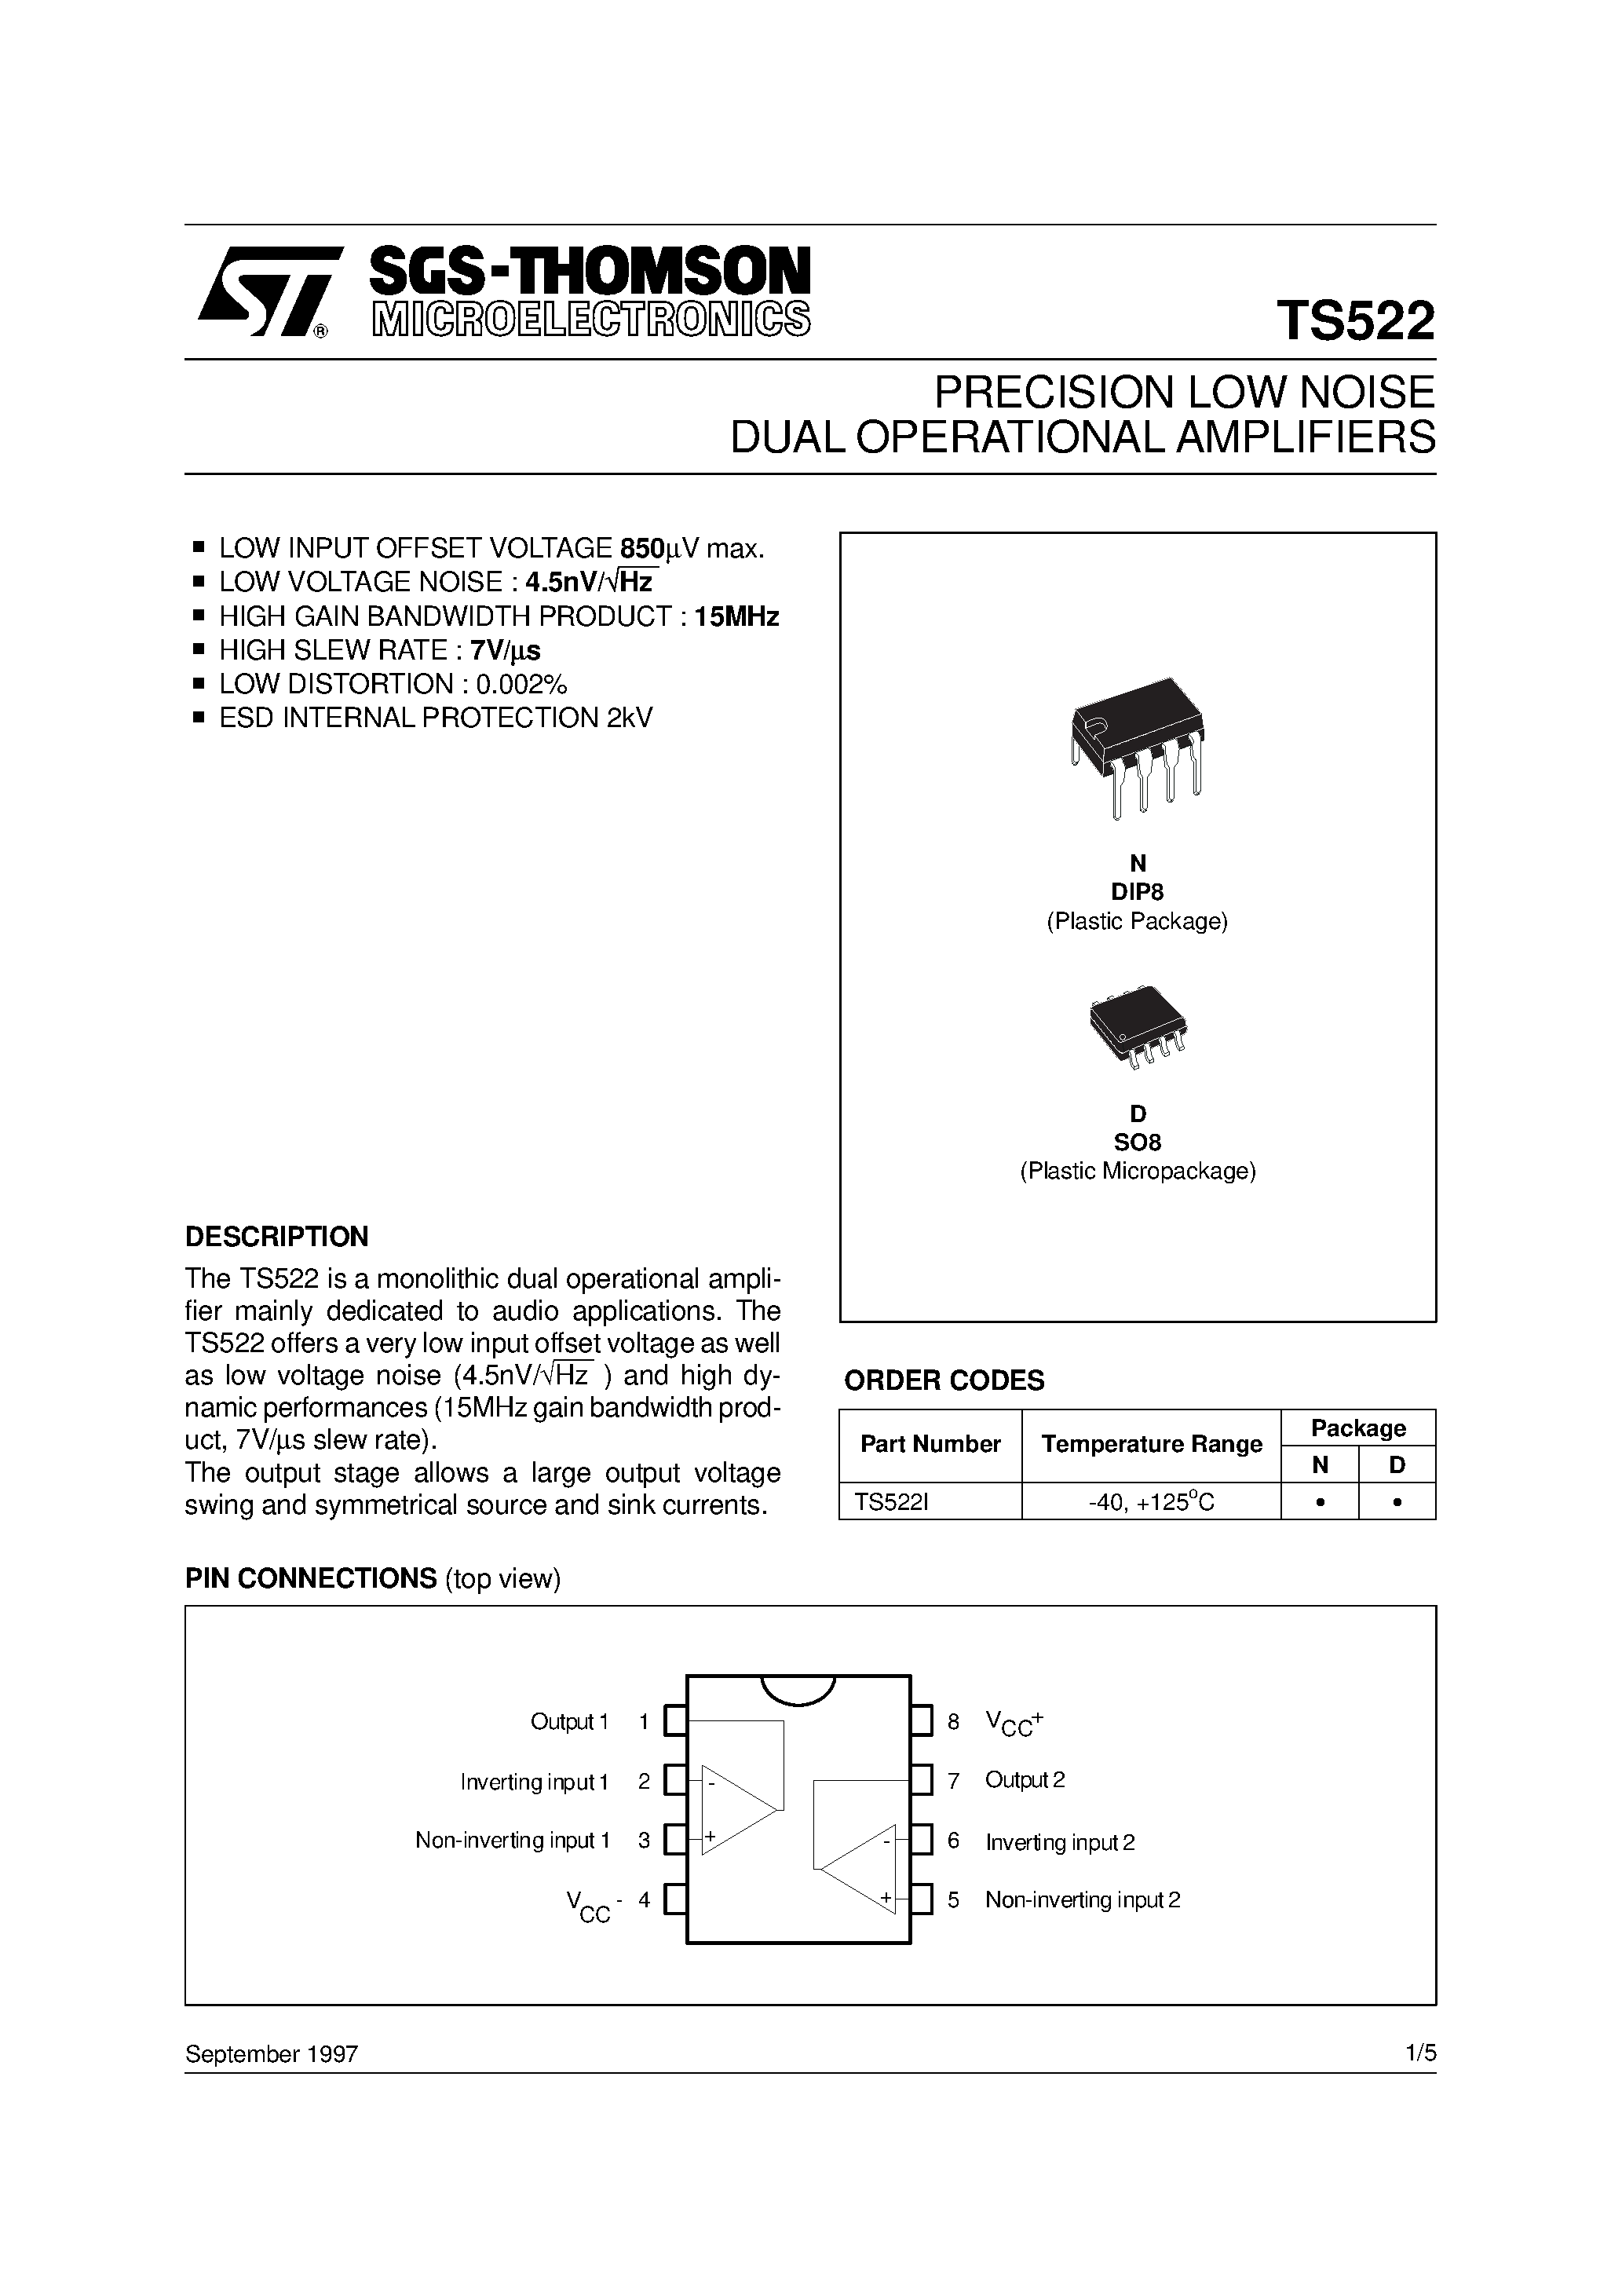 Datasheet TS522 - PRECISION LOW NOISE DUAL OPERATIONAL AMPLIFIERS page 1